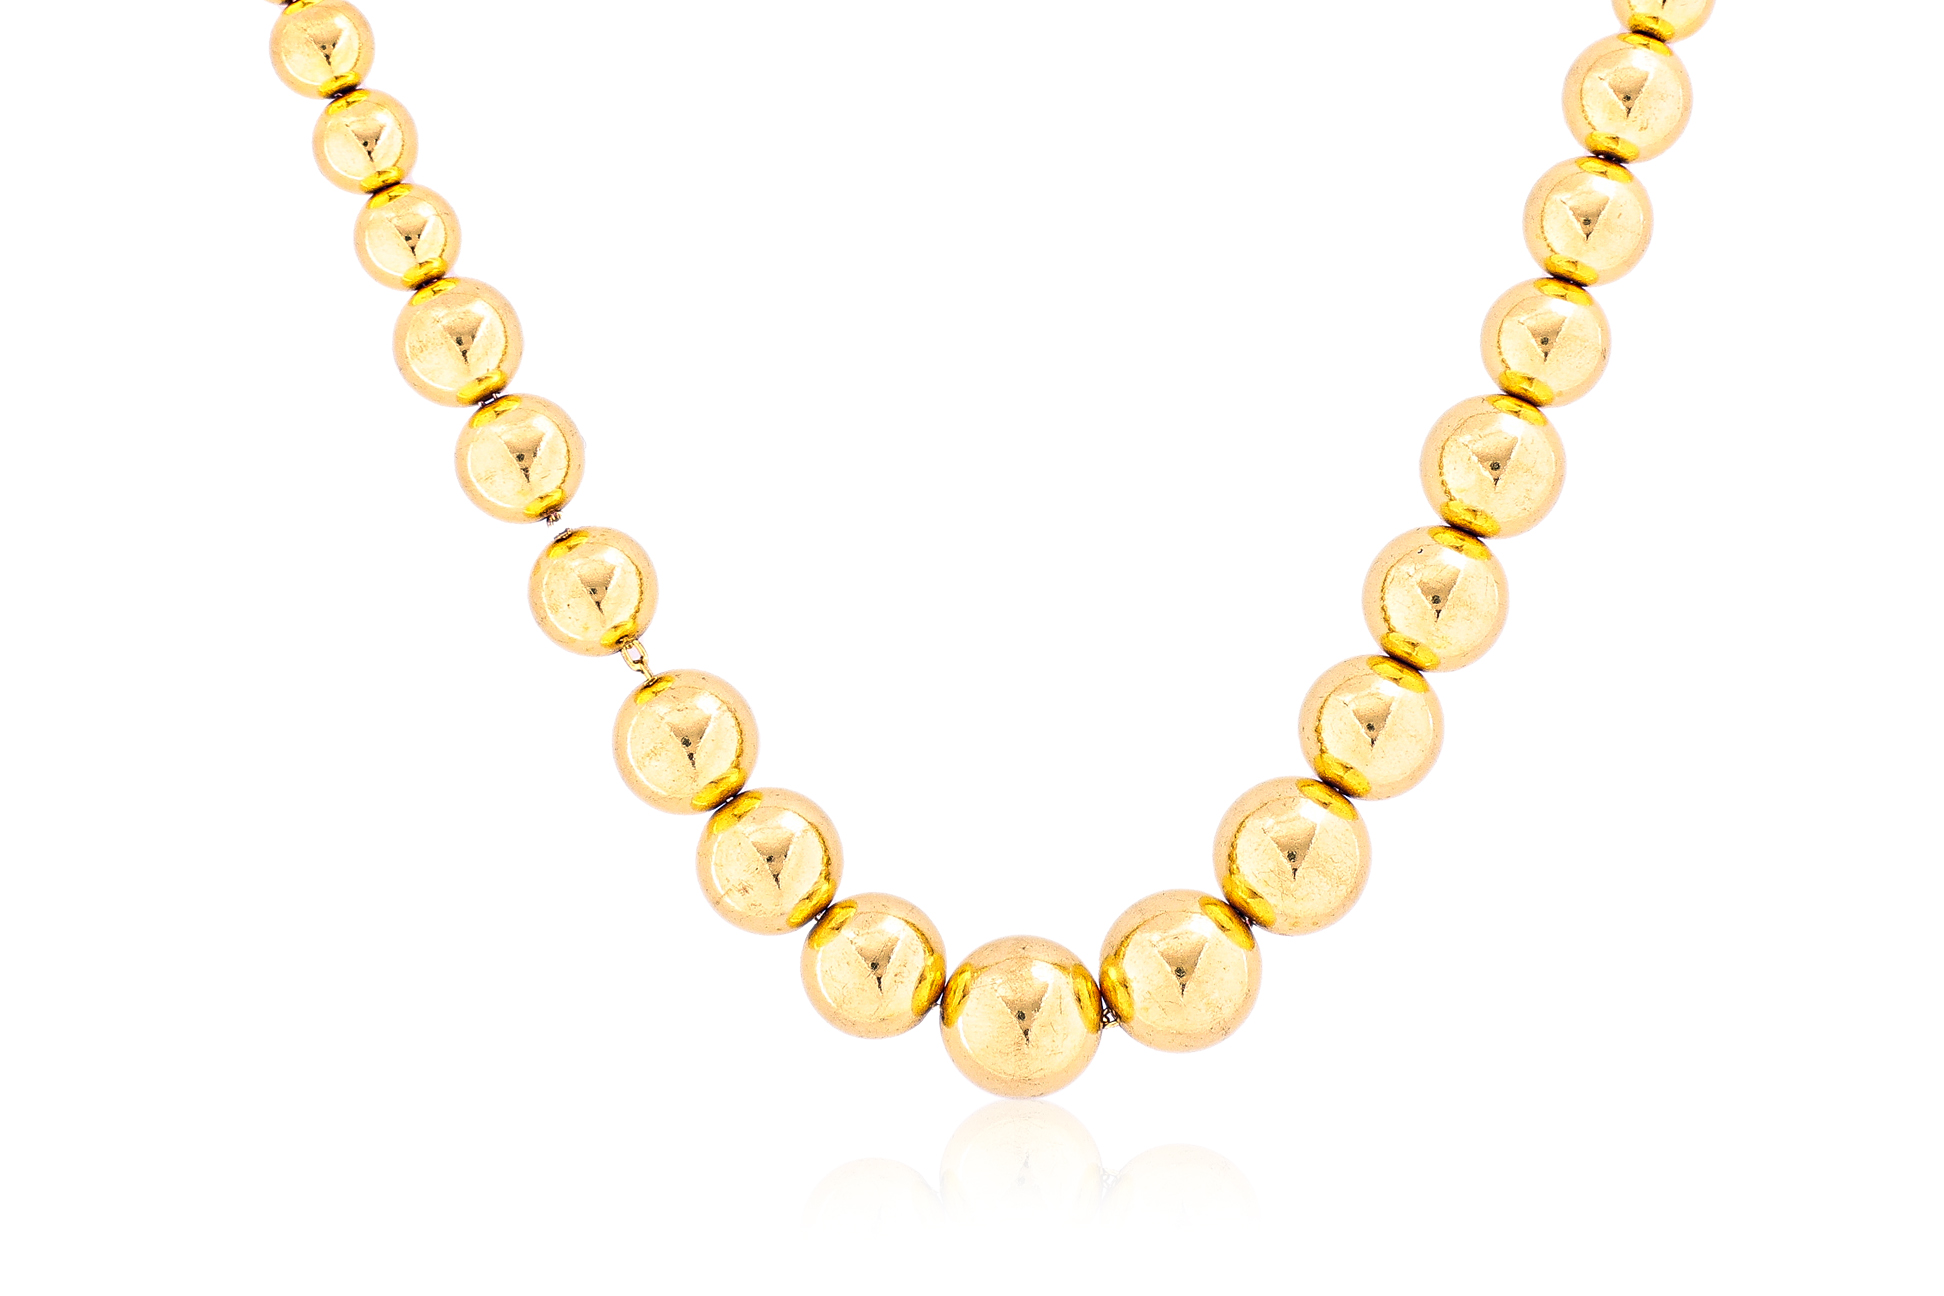 A GRADUATED GOLD BEAD NECKLACE